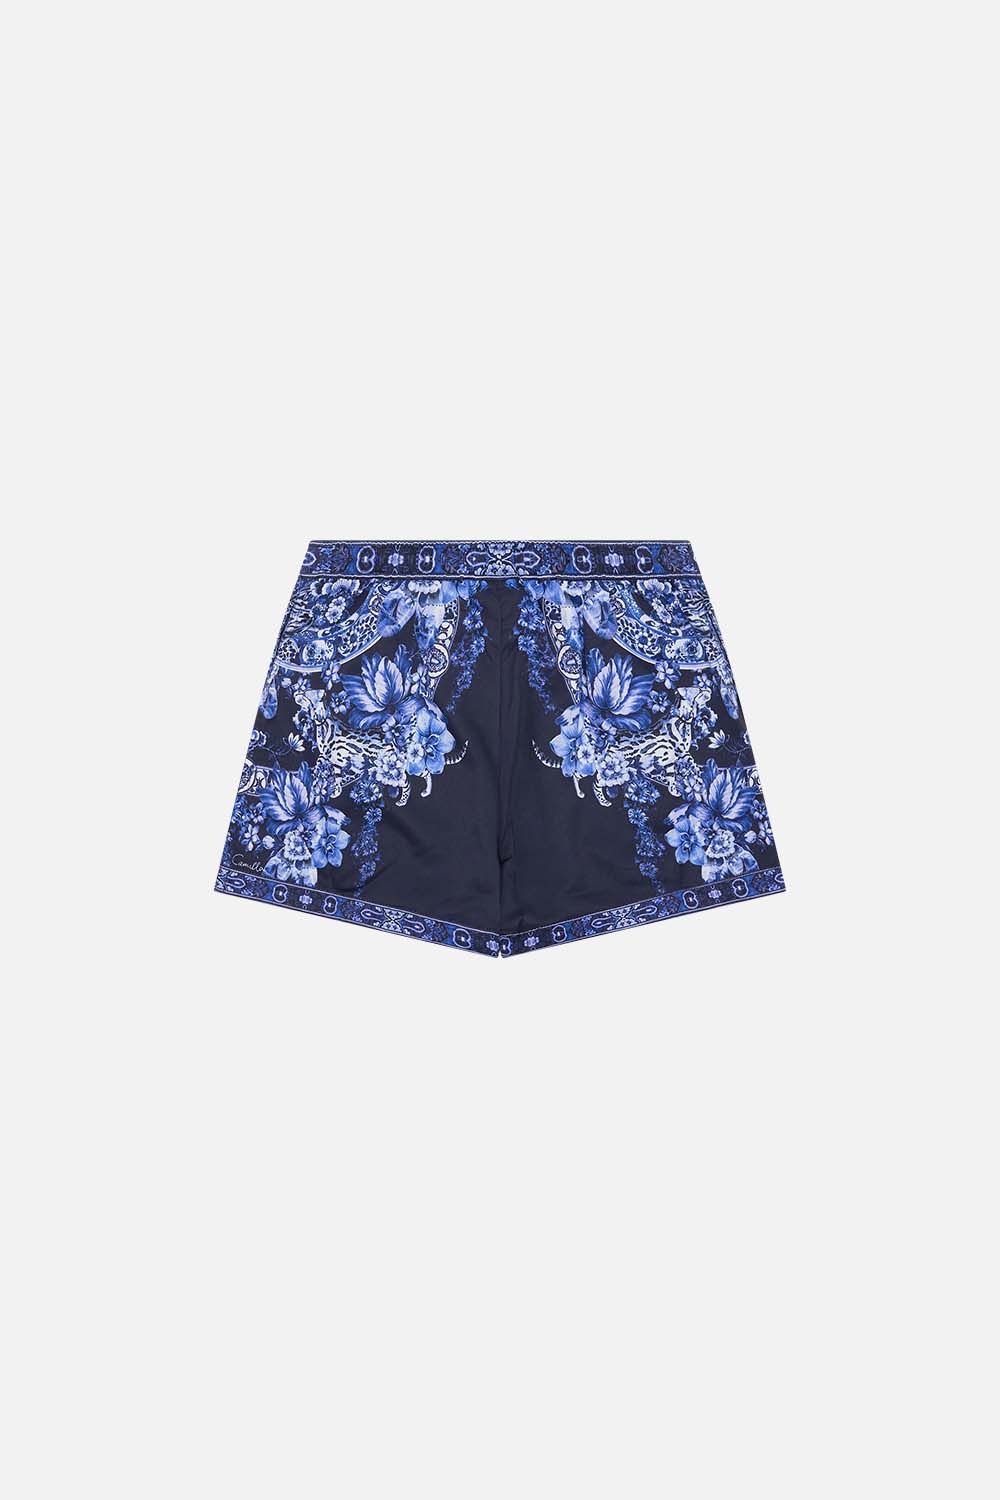 Back product view of Milla By CAMILLA boys boardshort in Delft Dynasty print